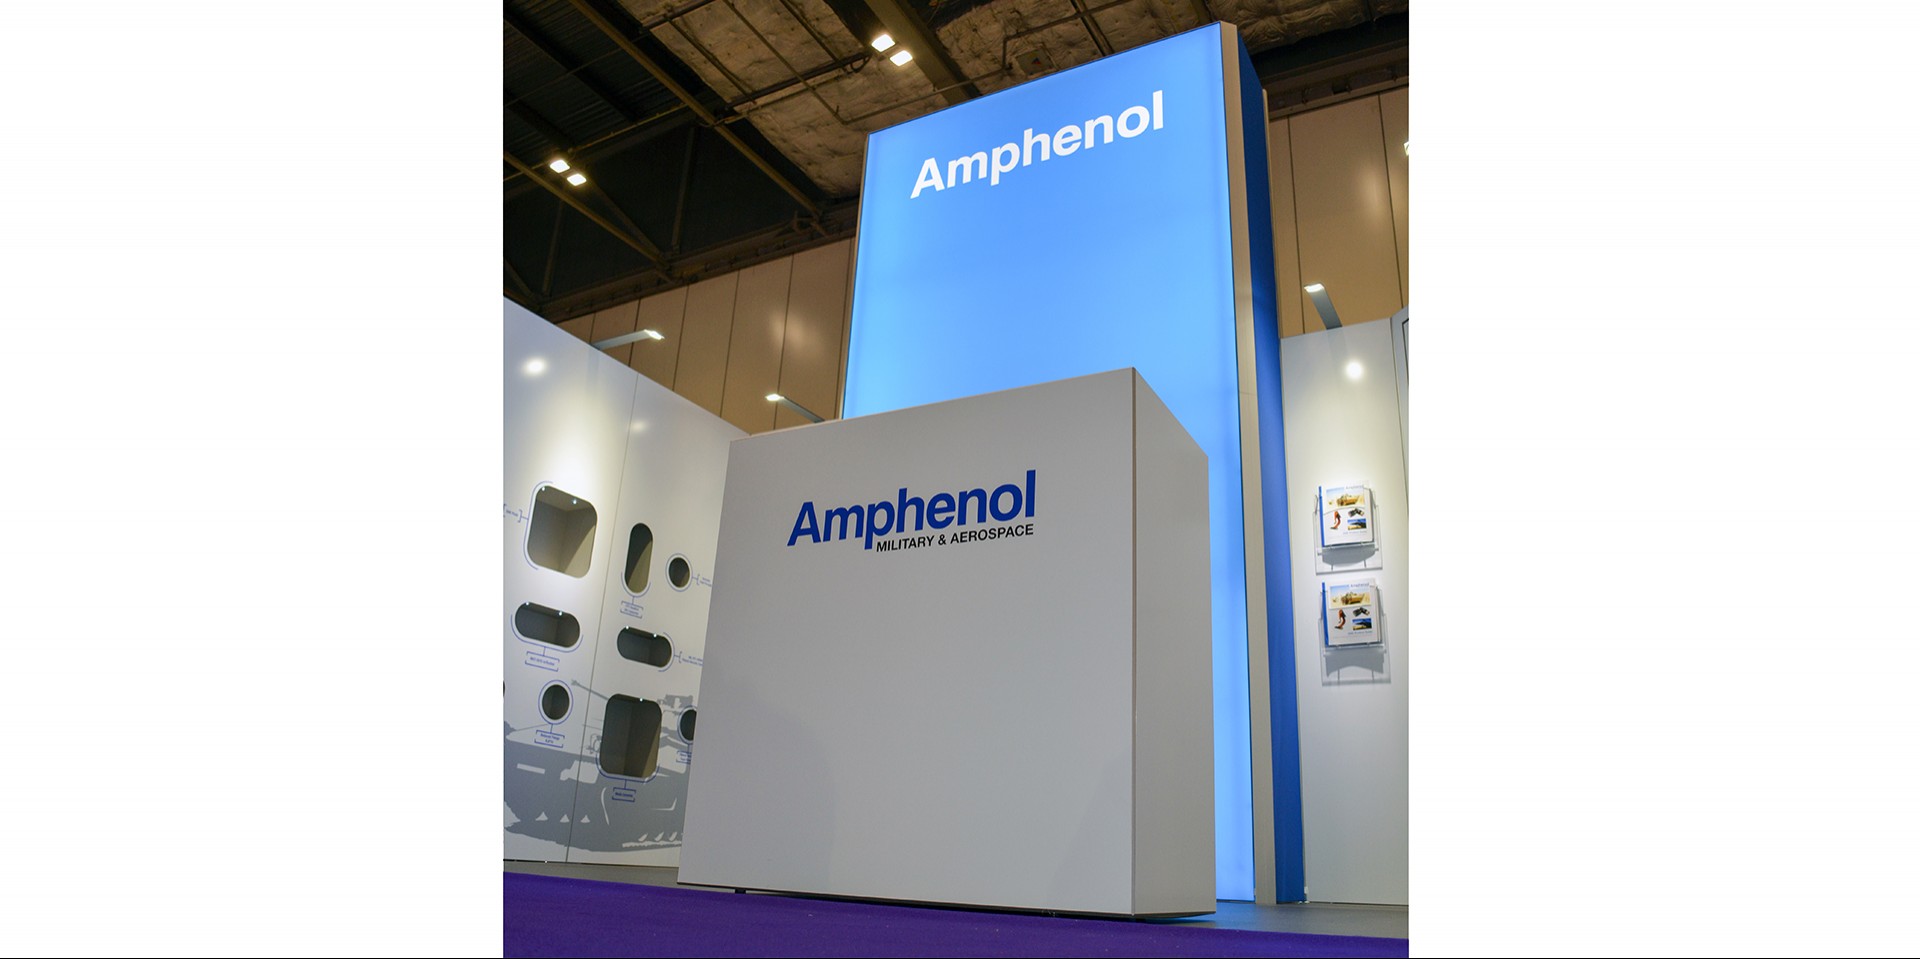 amphenol exhibition stand design by guardian display - Guardian Display